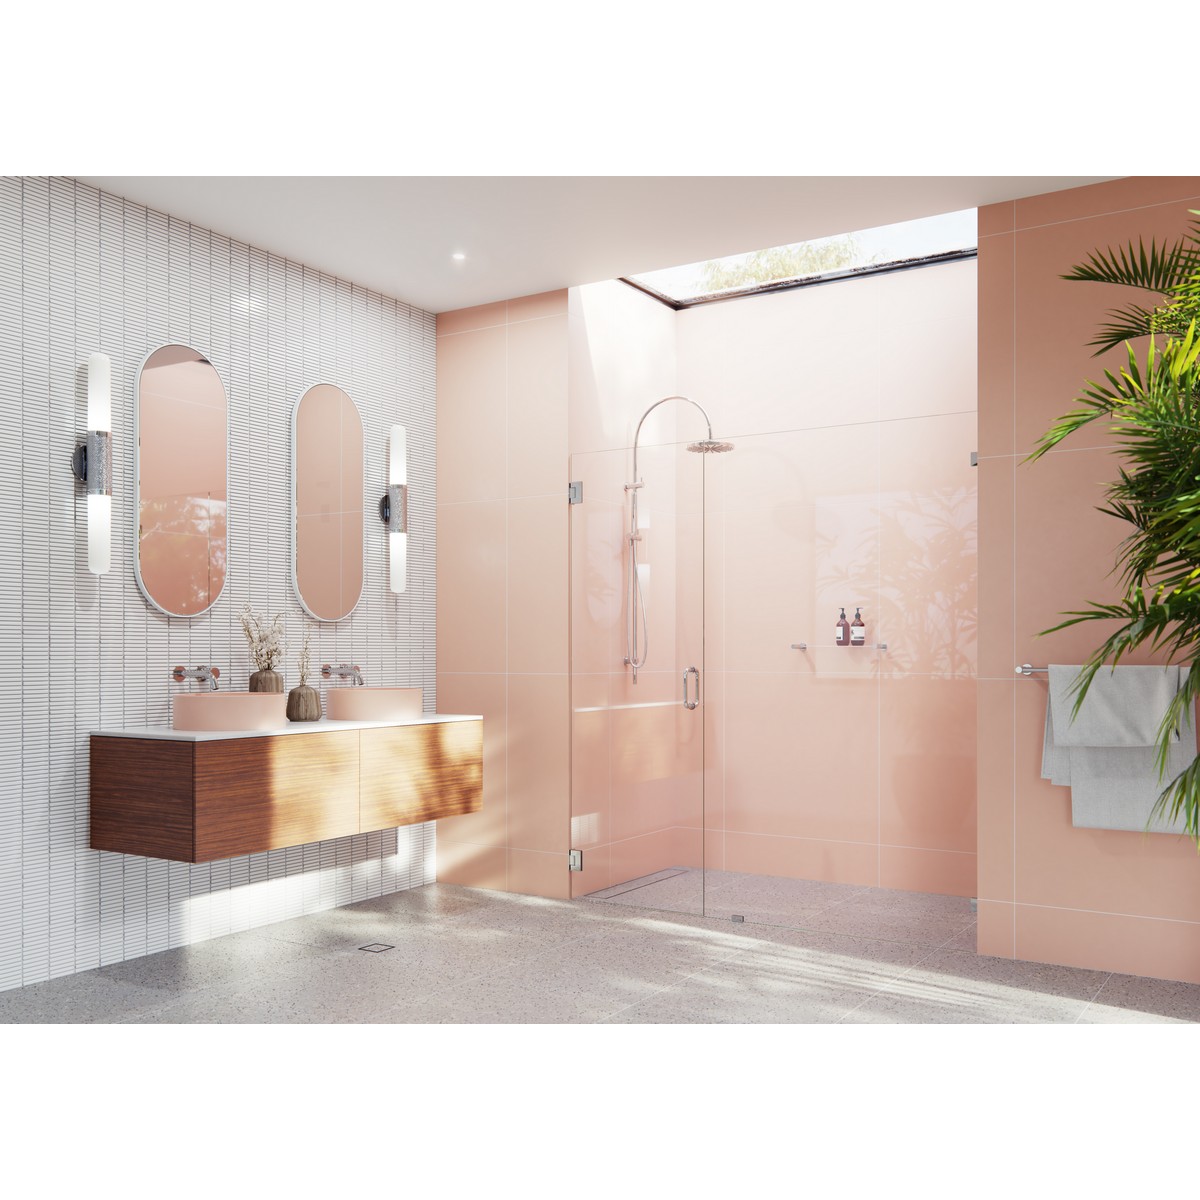 GLASS WAREHOUSE GW-WH-75.75 ILLUME 75 3/4 W X 78 H WALL HINGED FULLY FRAMELESS GLASS SHOWER ENCLOSURE